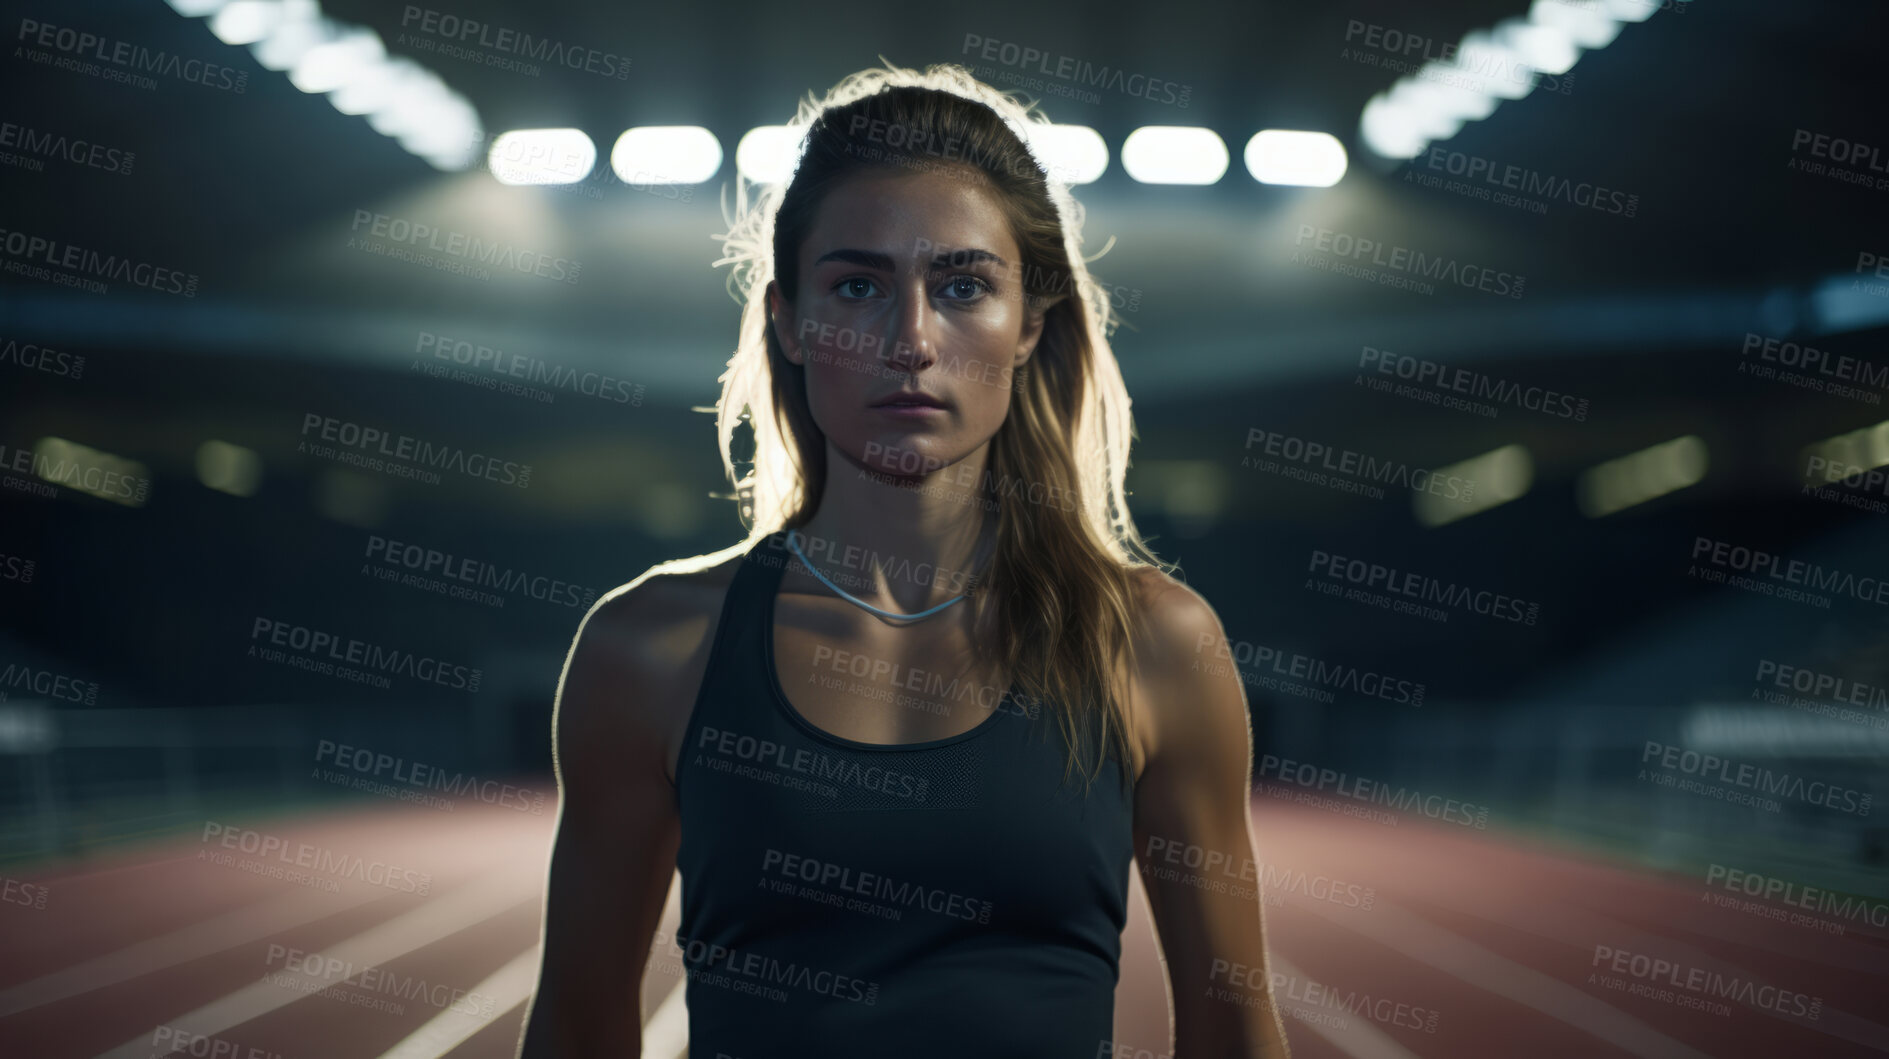 Buy stock photo Editorial shot of woman standing on track at night. Fitness, runner Concept.